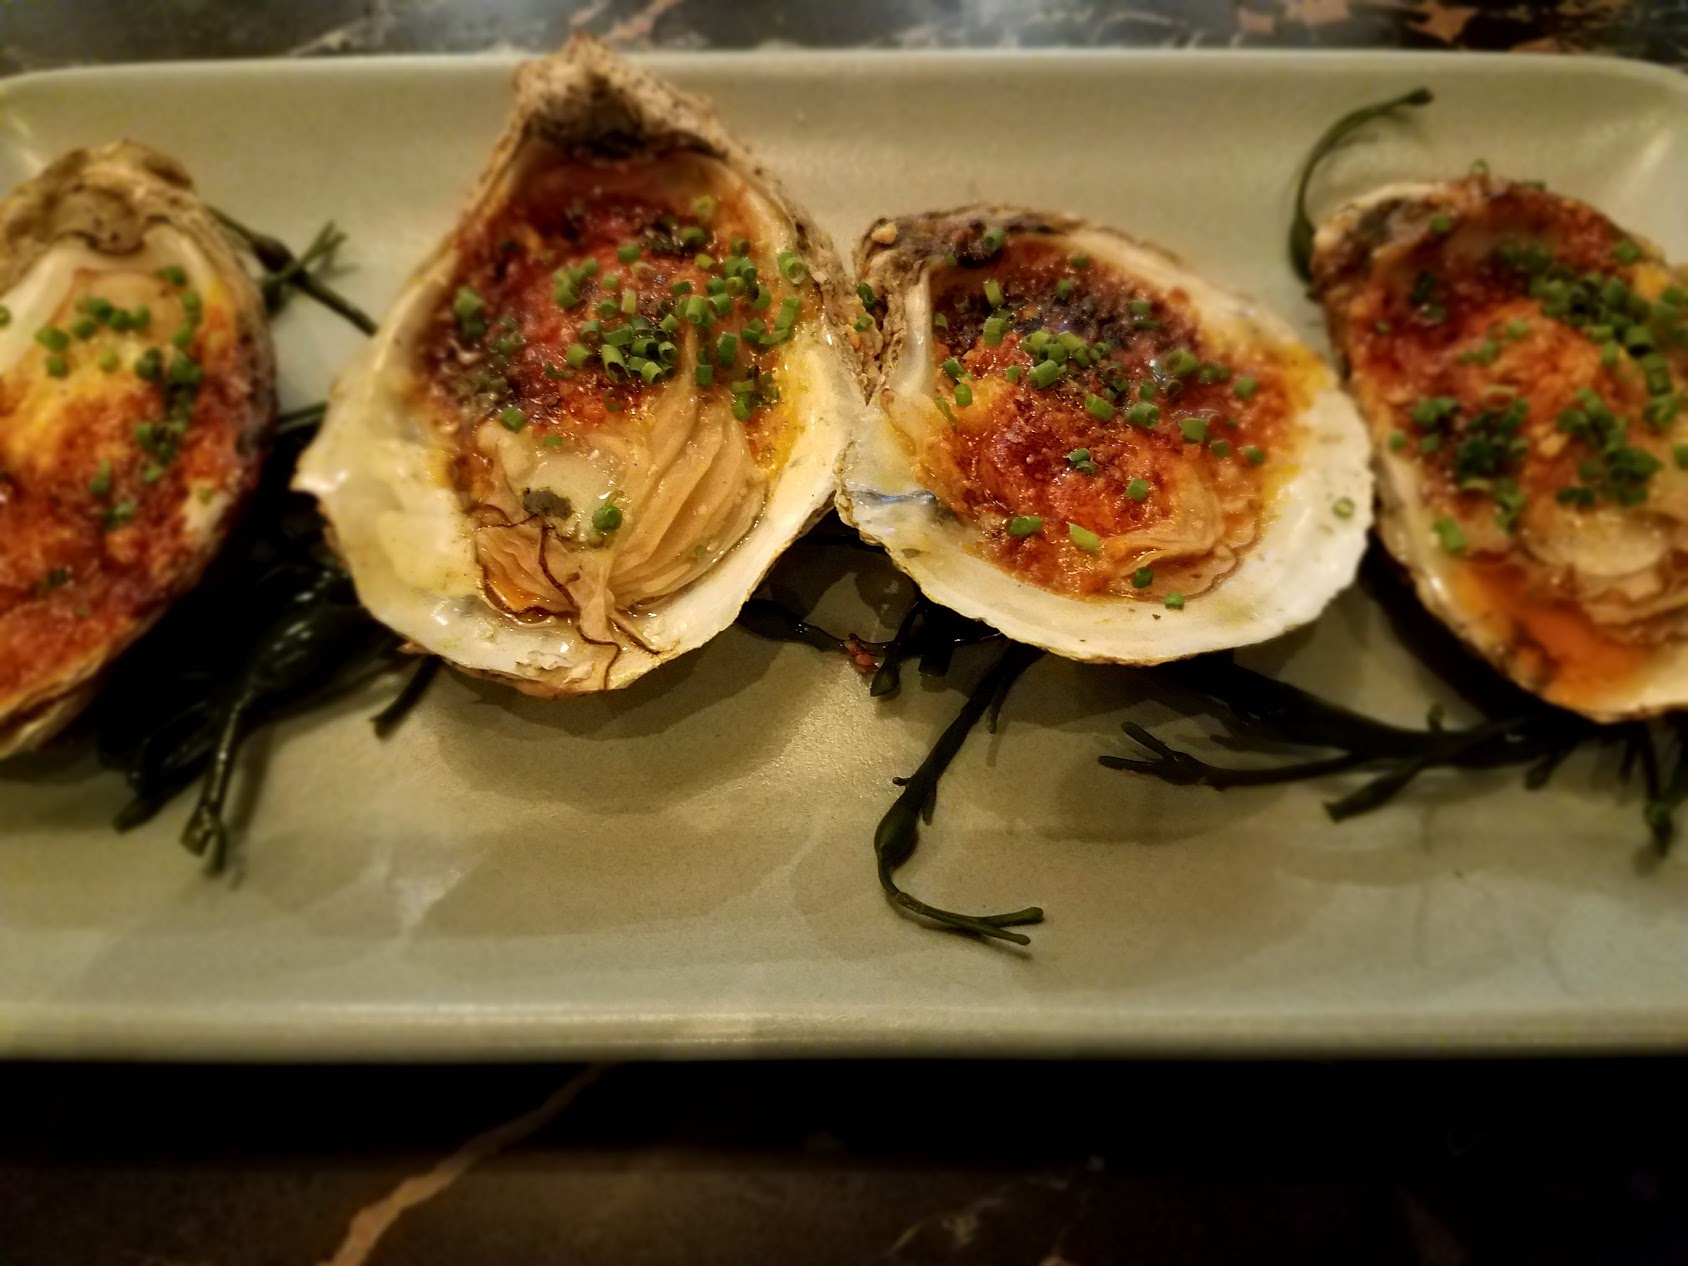 Coal roasted oysters at Proxi Chicago.